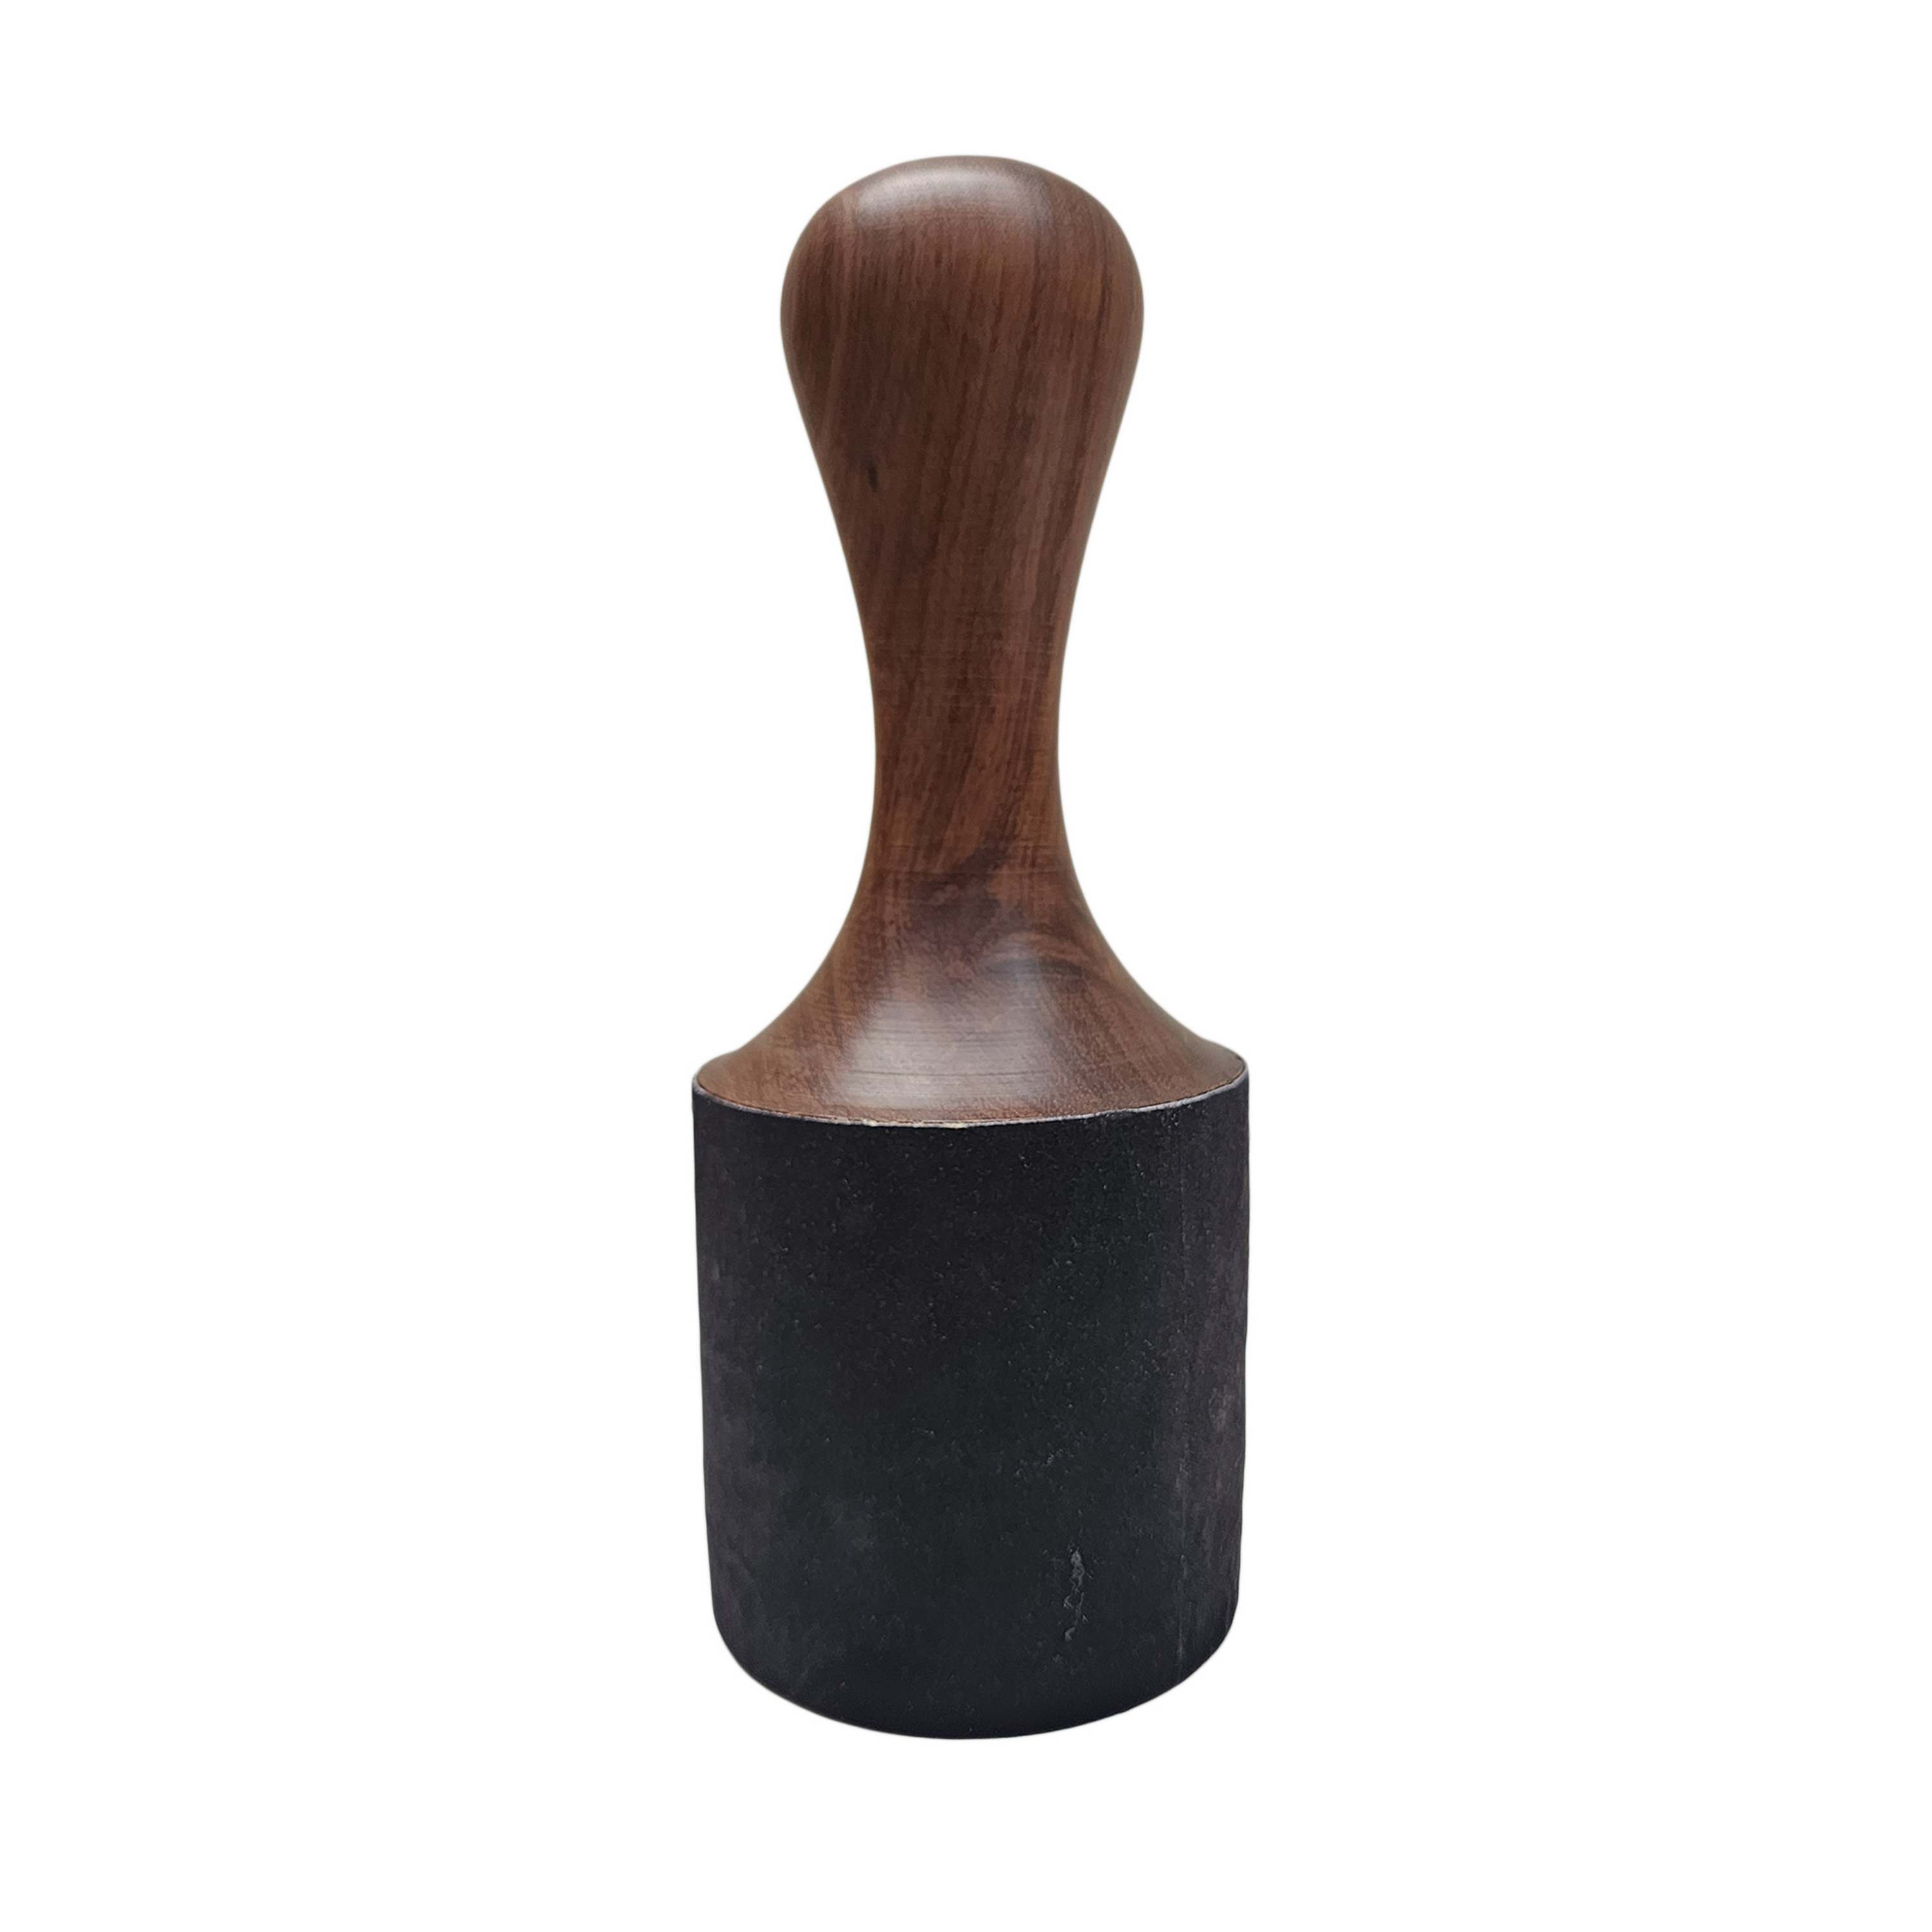 Singing Bowl Accessories, Wooden And Leather, Stroking And Playing Mallet, Extra Large